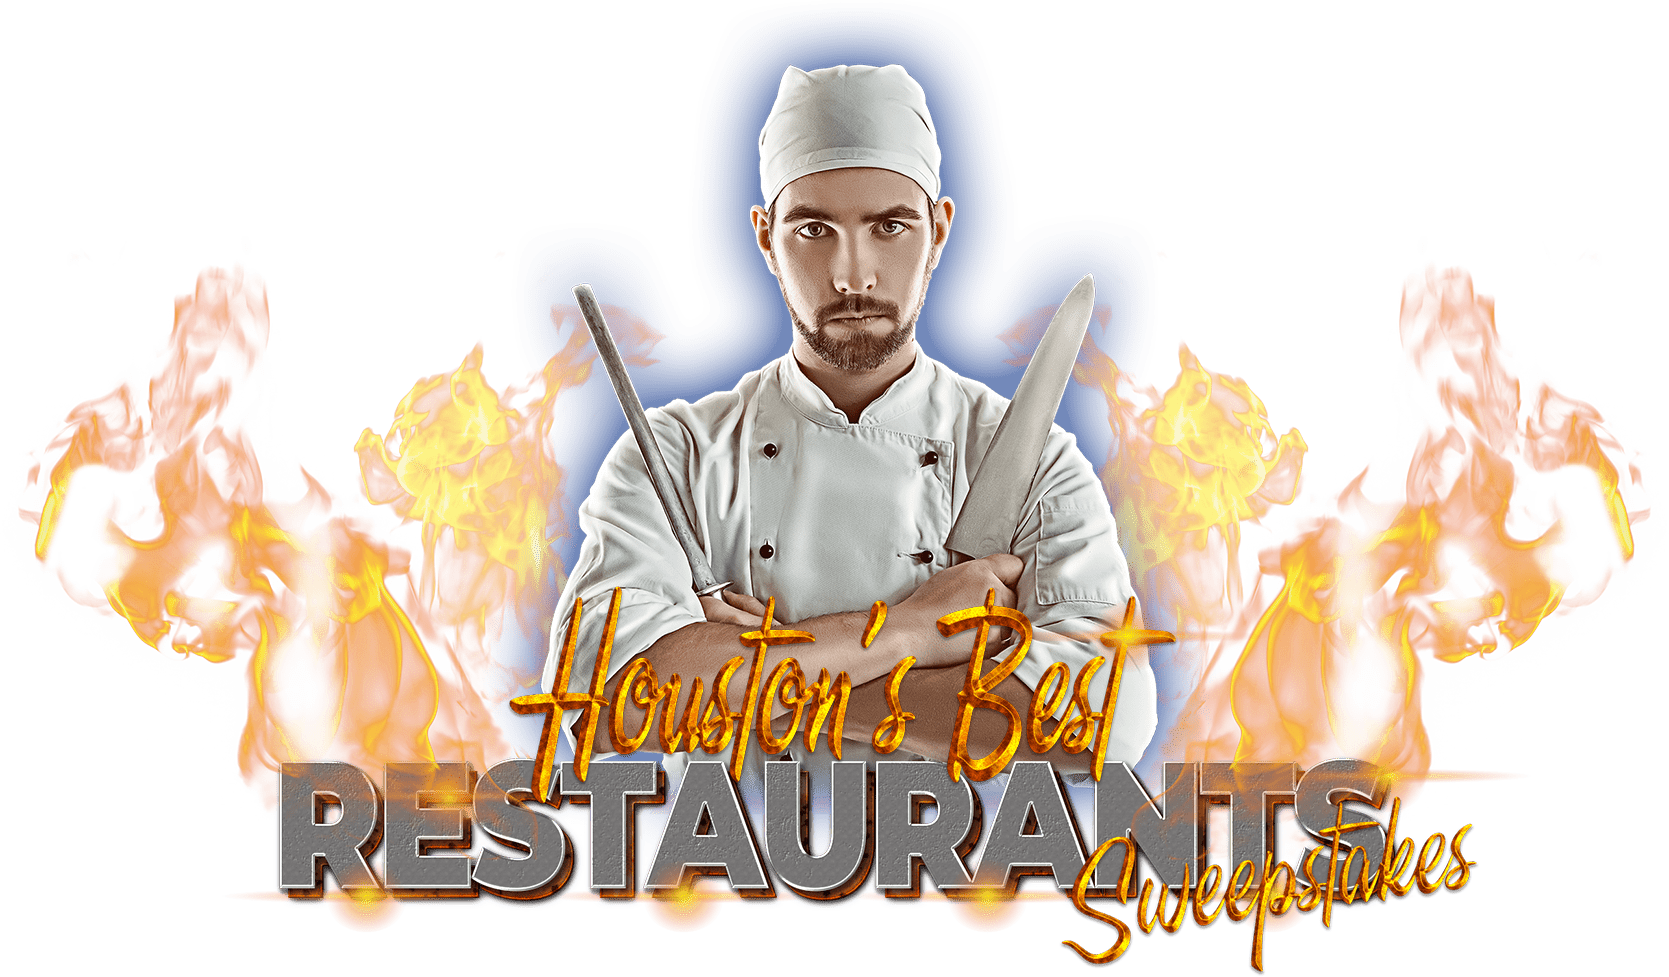 Houston's Best Restaurants Sweepstakes sponsored by Wright Business Technologies